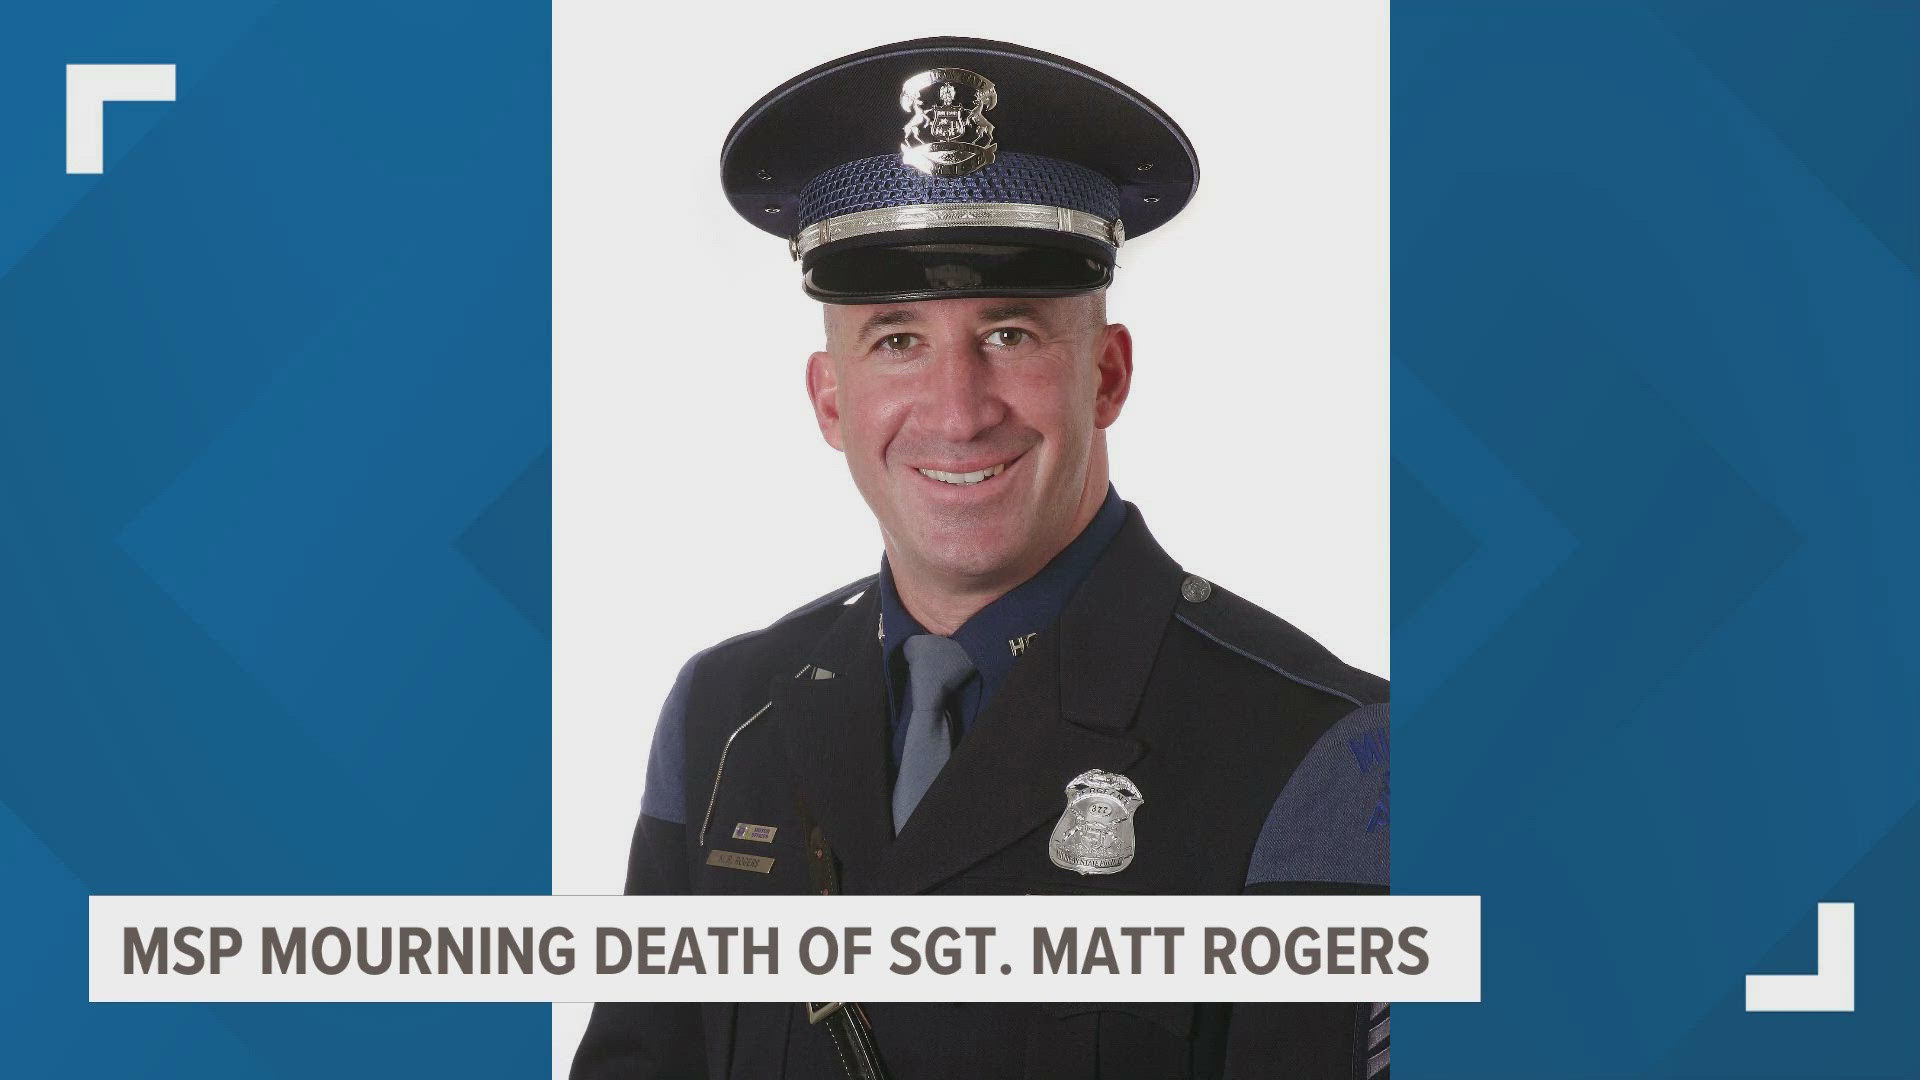 He will be remembered as a loving father, devoted friend, mentor and dutiful community servant, troopers say.